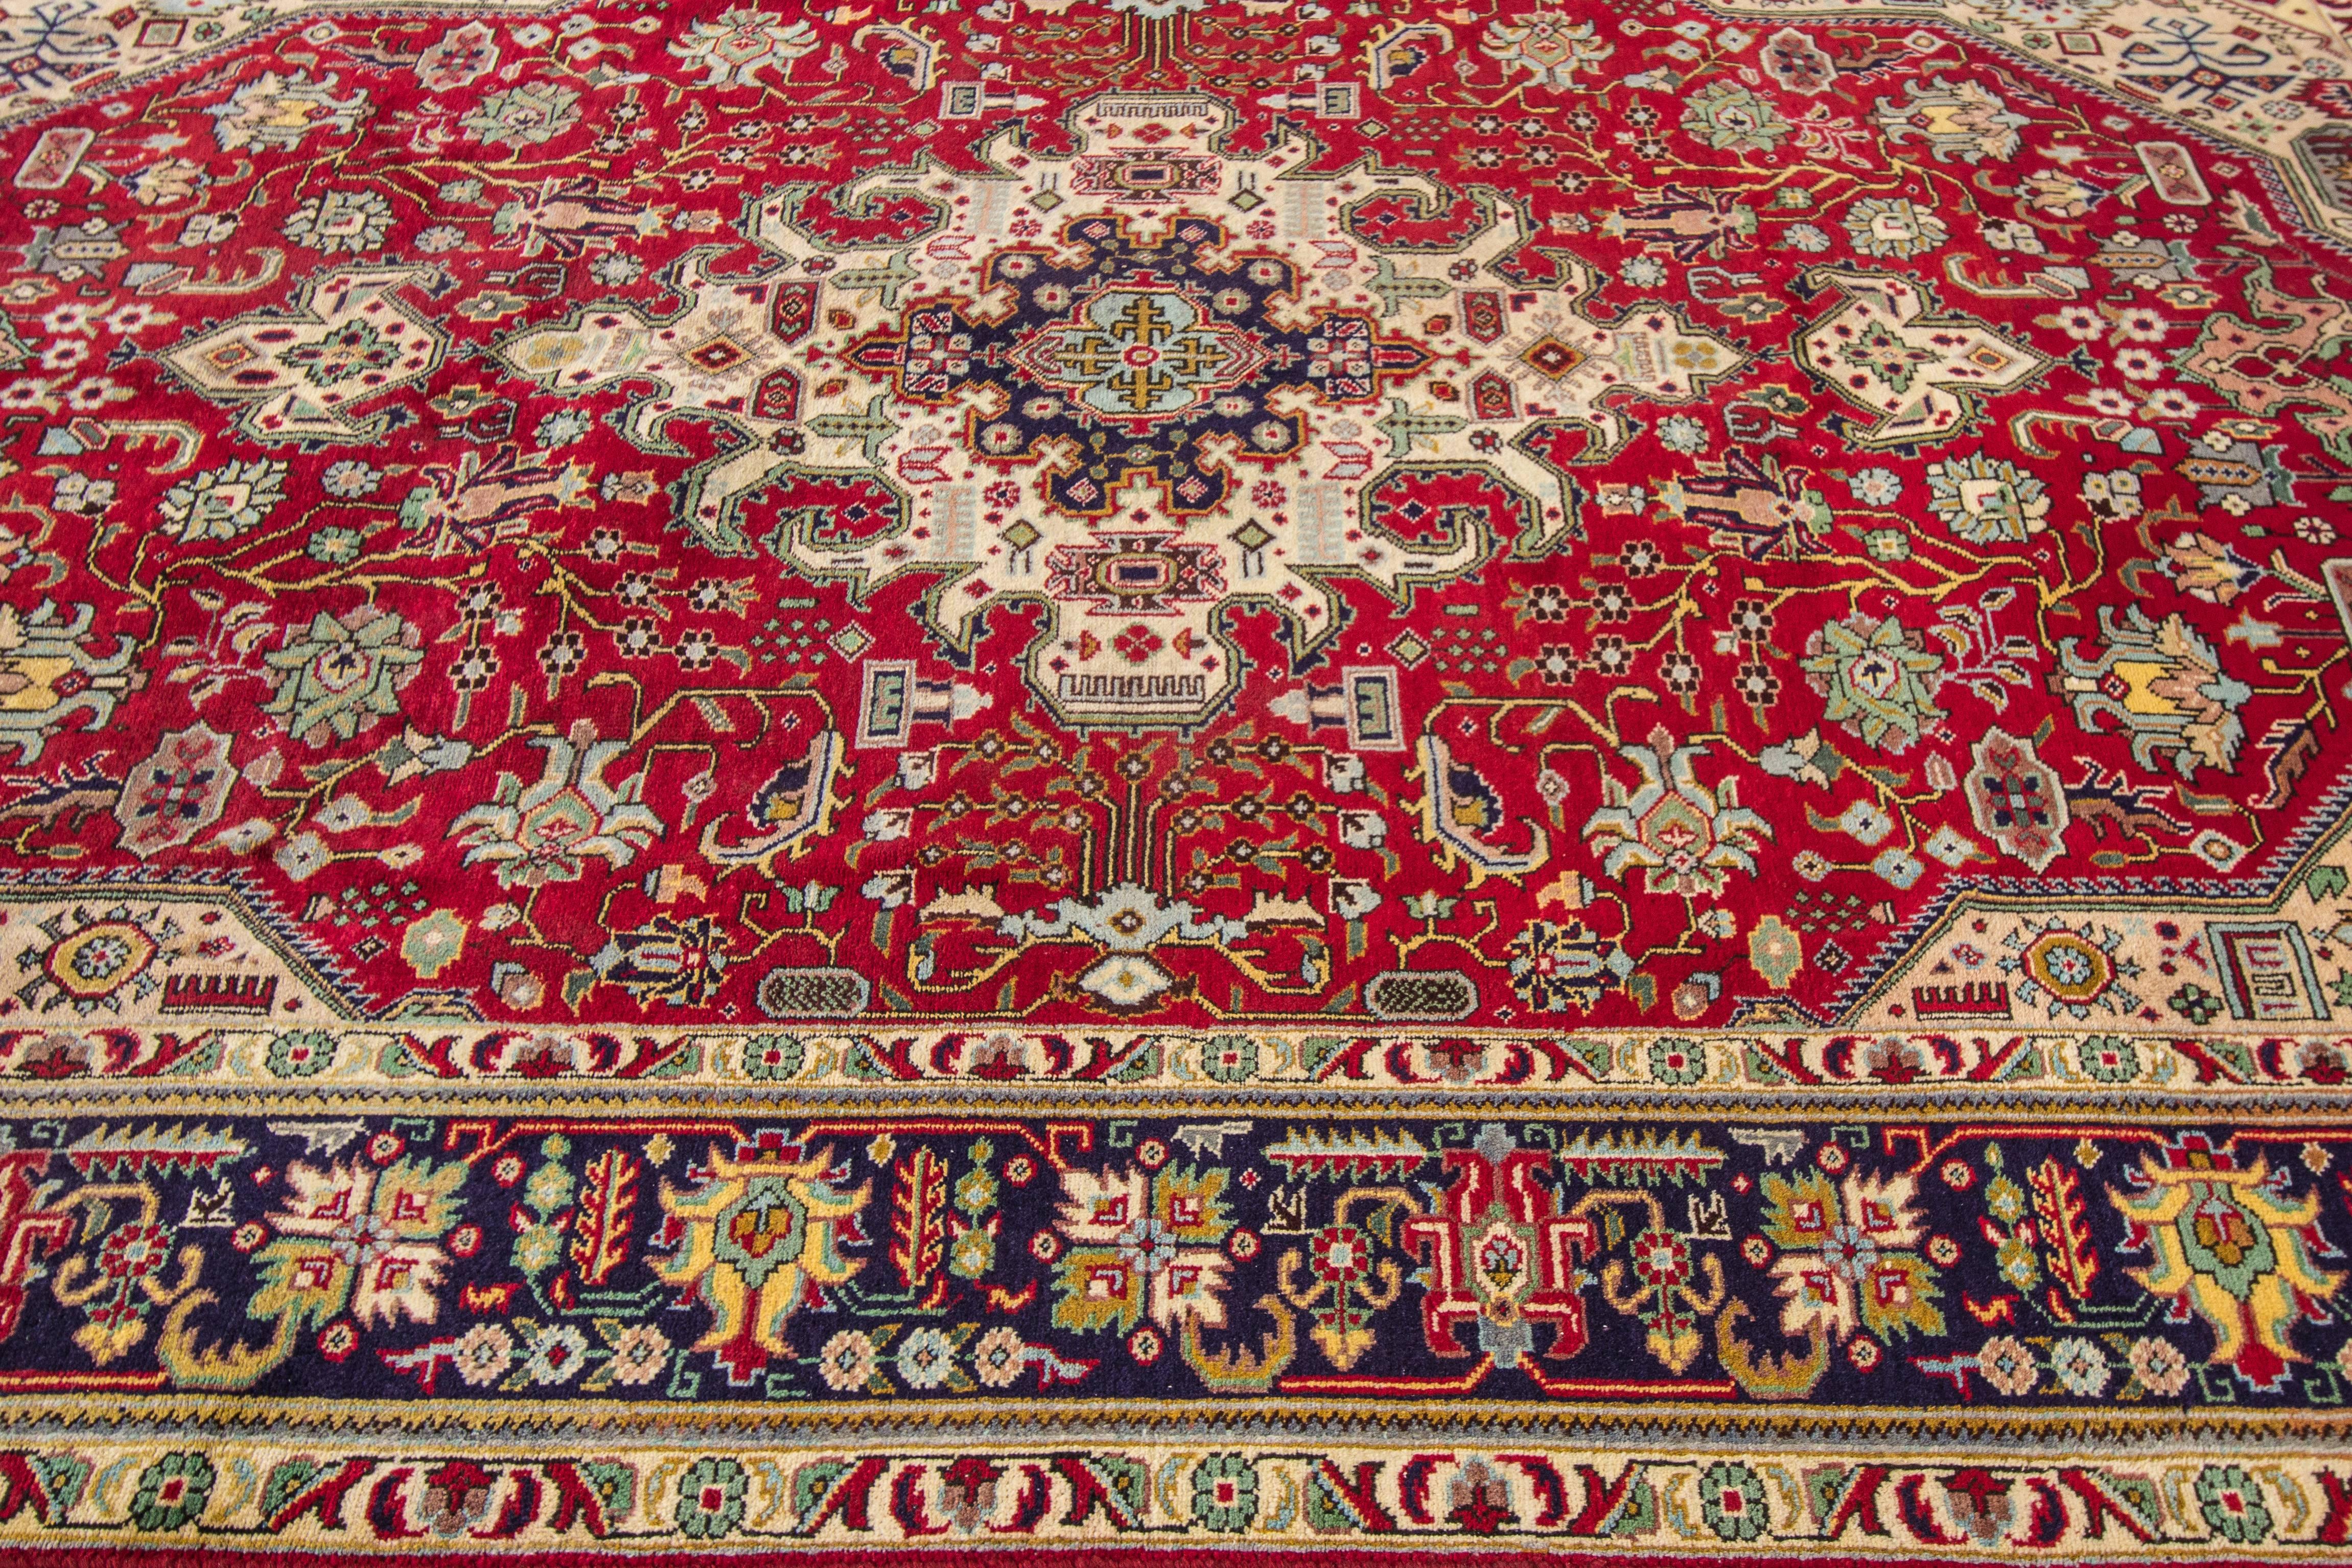 Measures: 6'.7 x 9'.7.
Persian Kashan rugs – Kashan, located in the province of Isfahan, Iran, is an oasis village on the western edge of the Great Salt Desert (Dasht-e Kavir). It lies approximately 3000 feet above sea level in the eastern Zagros